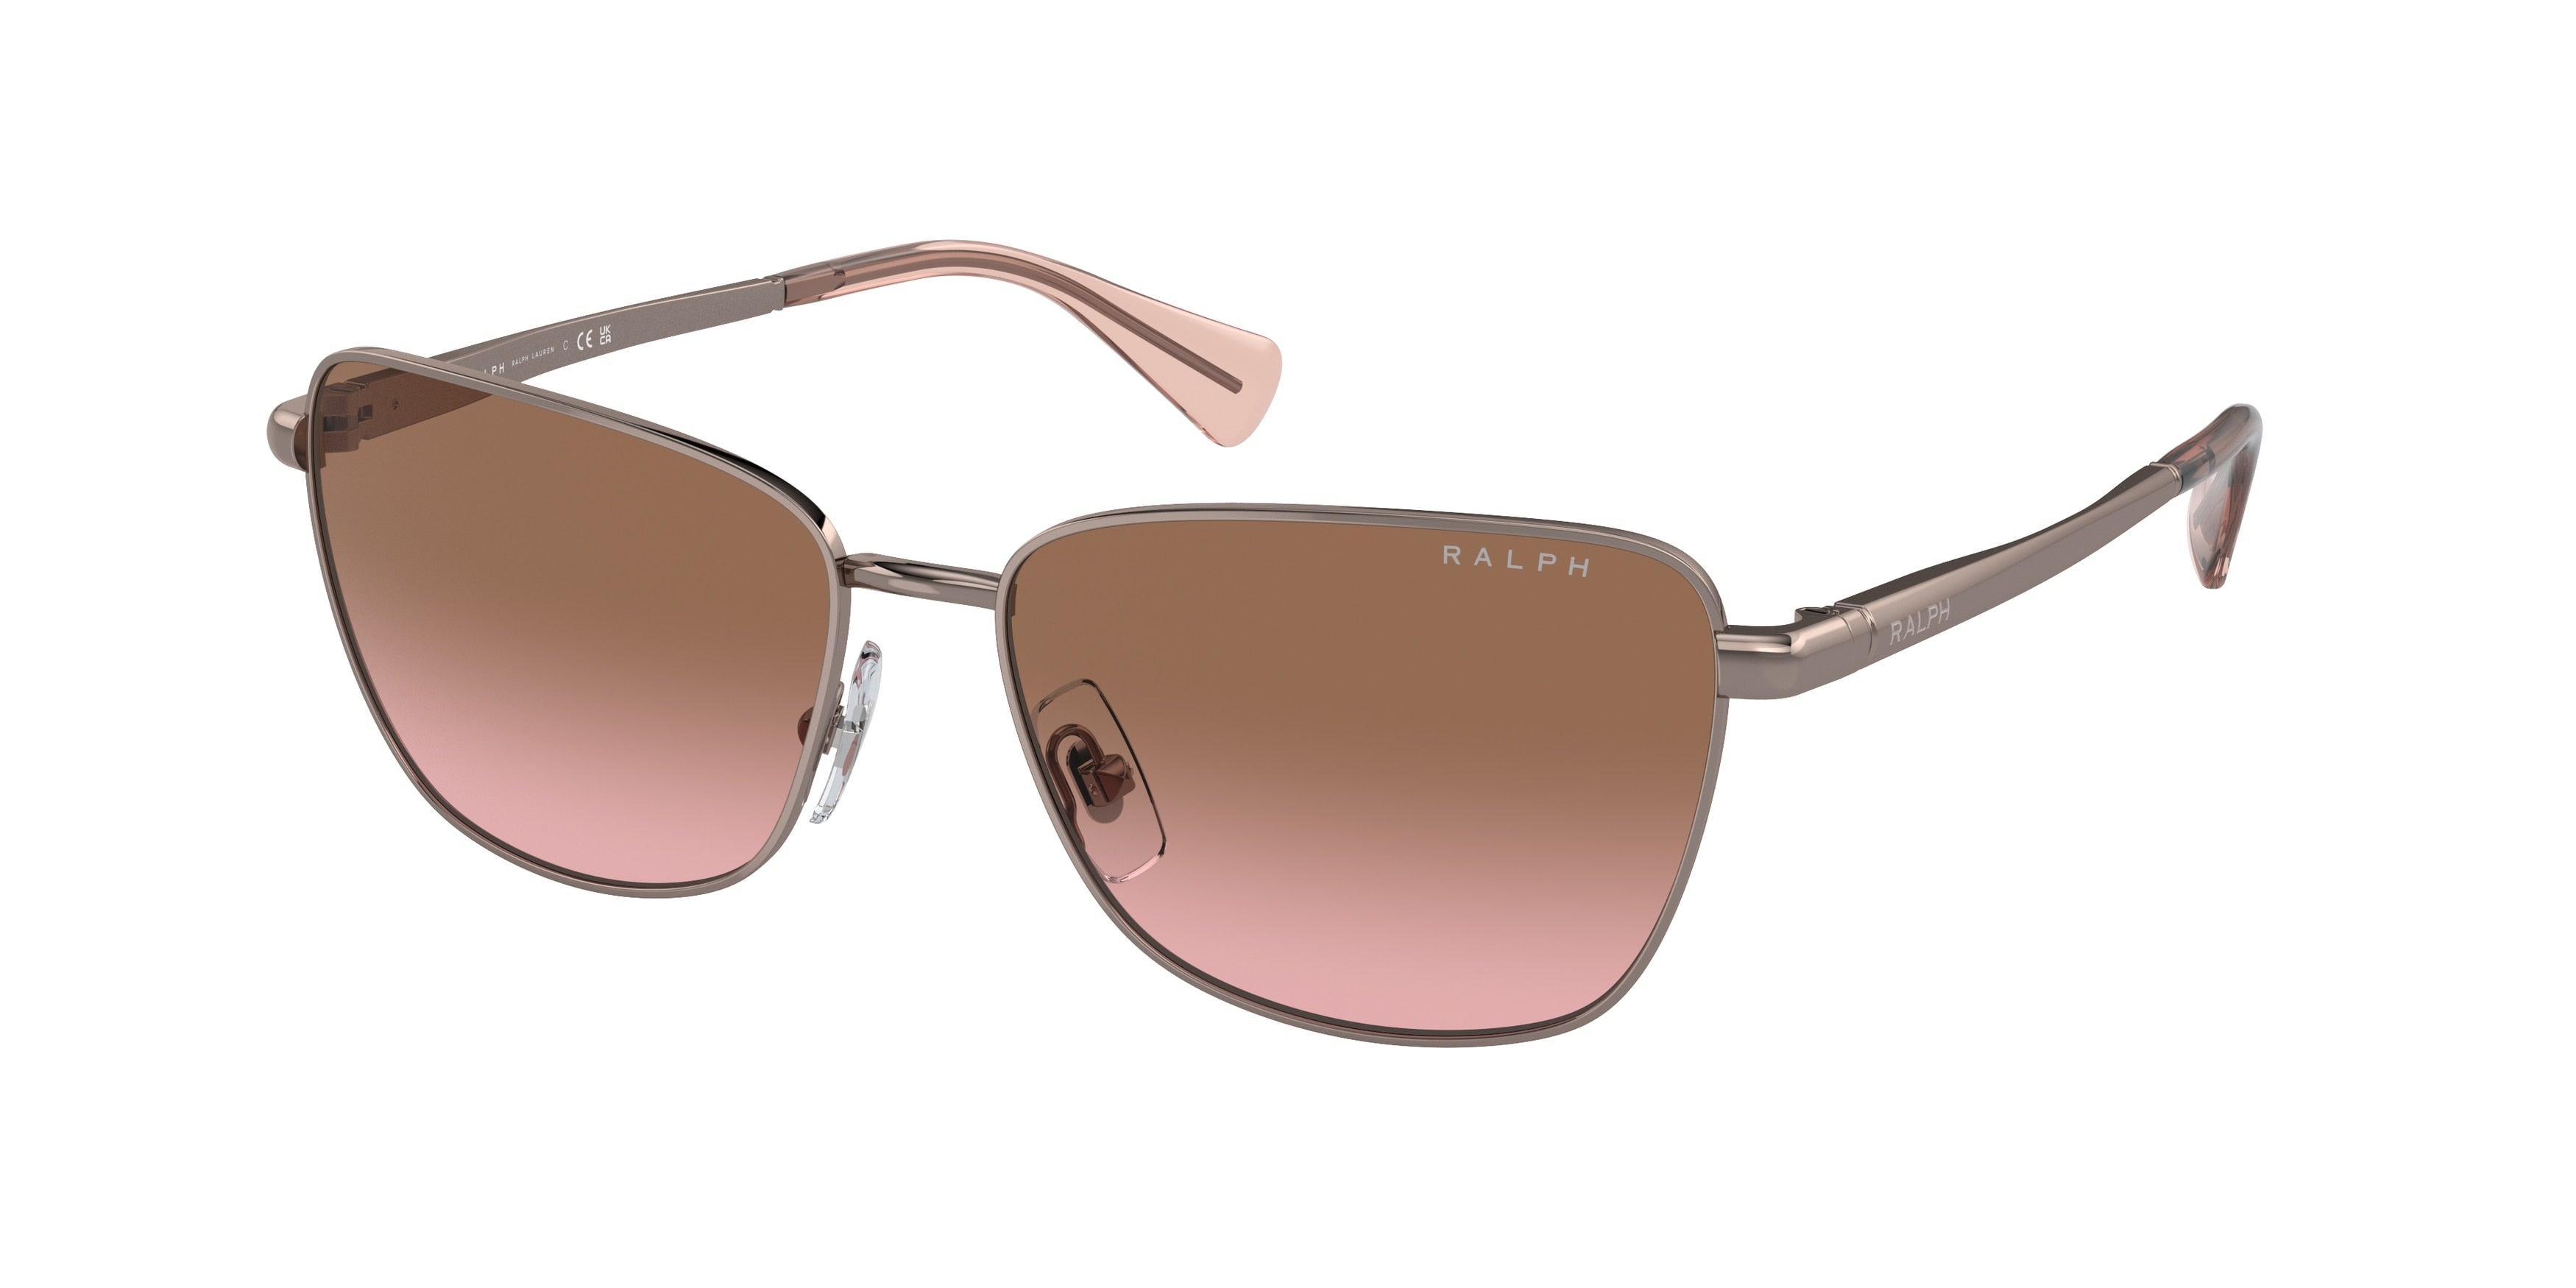 Ralph RA4143 Butterfly Sunglasses  942714-Shiny Rose Gold 57-145-15 - Color Map Gold